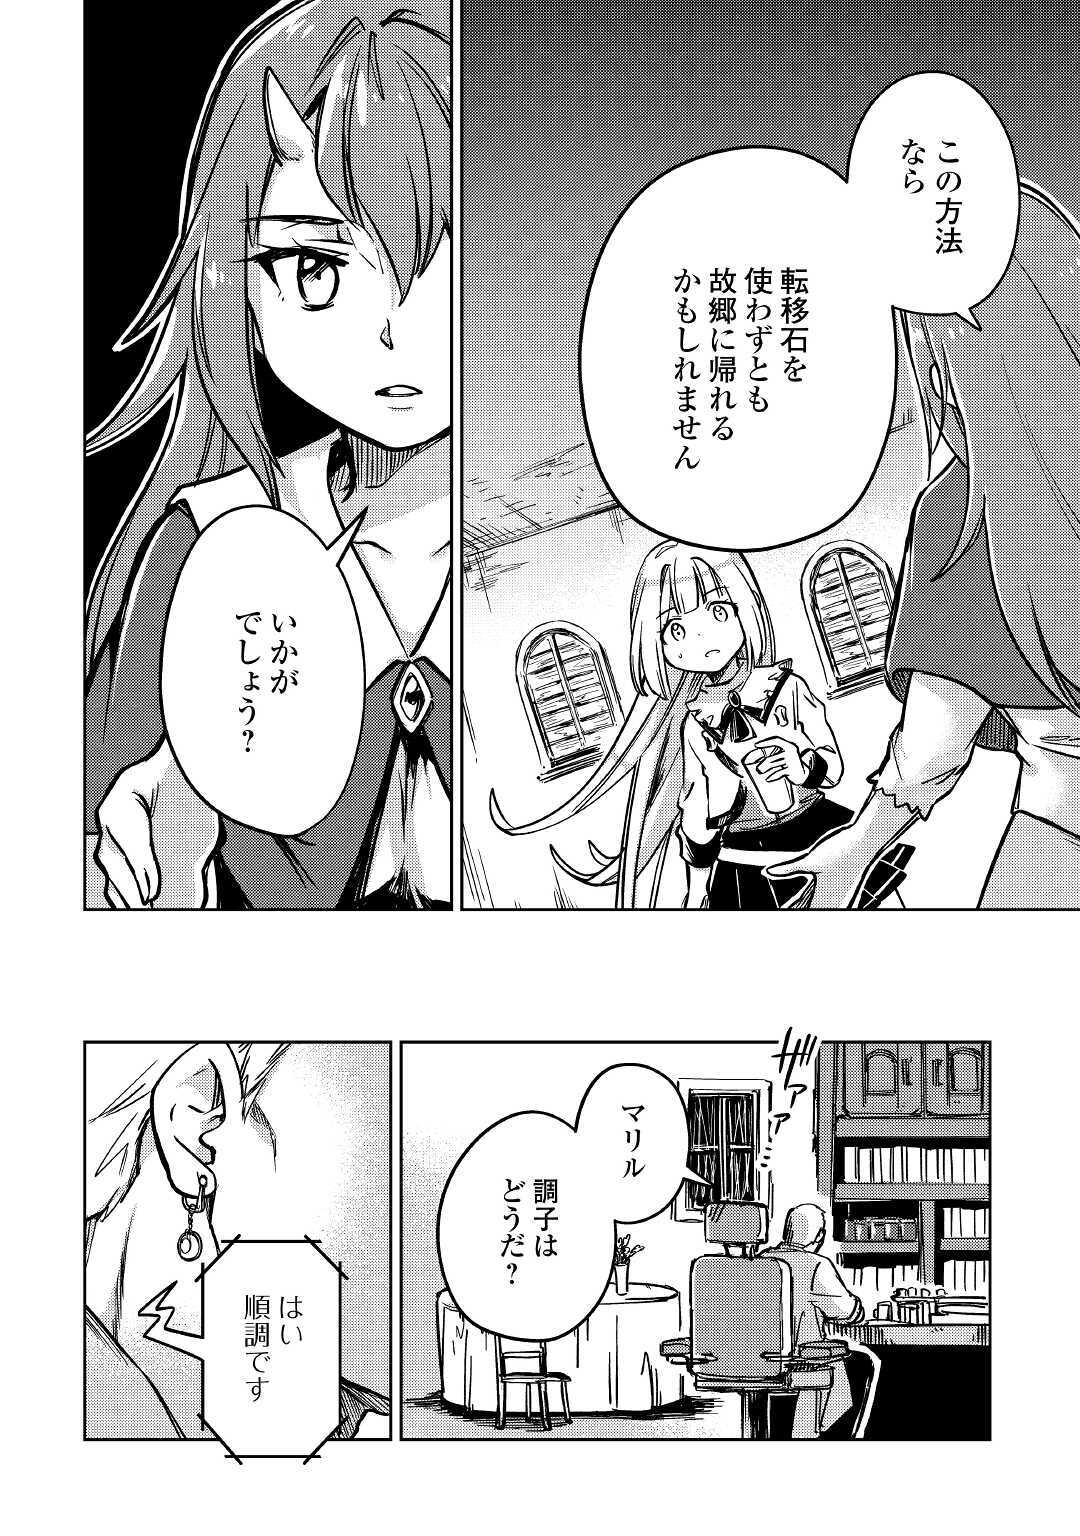 The Former Structural Researcher’s Story of Otherworldly Adventure 第26話 - Page 12